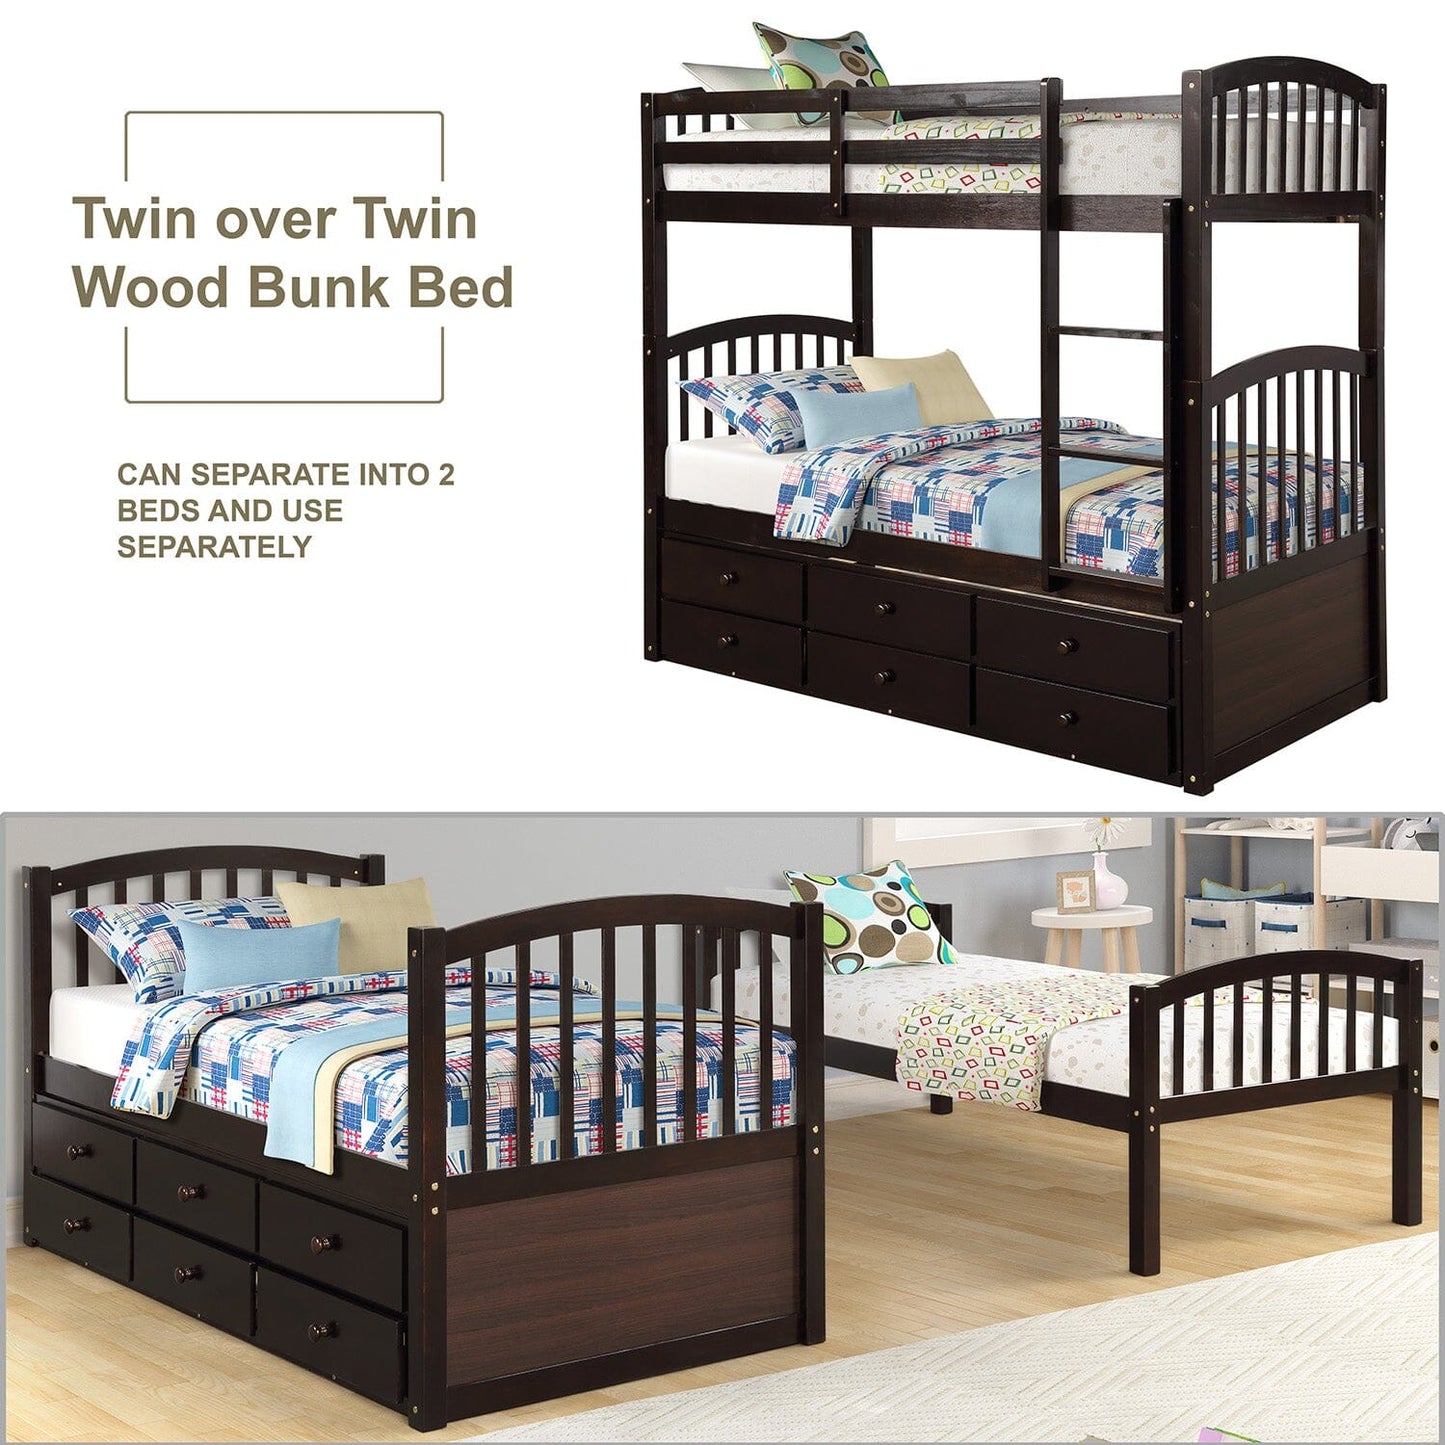 Twin Bunk Bed with Ladder, Safety Rail, Twin Trundle Bed with 3 Drawers for Kids, Teens Bedroom, Guest Room Furniture(Espresso)